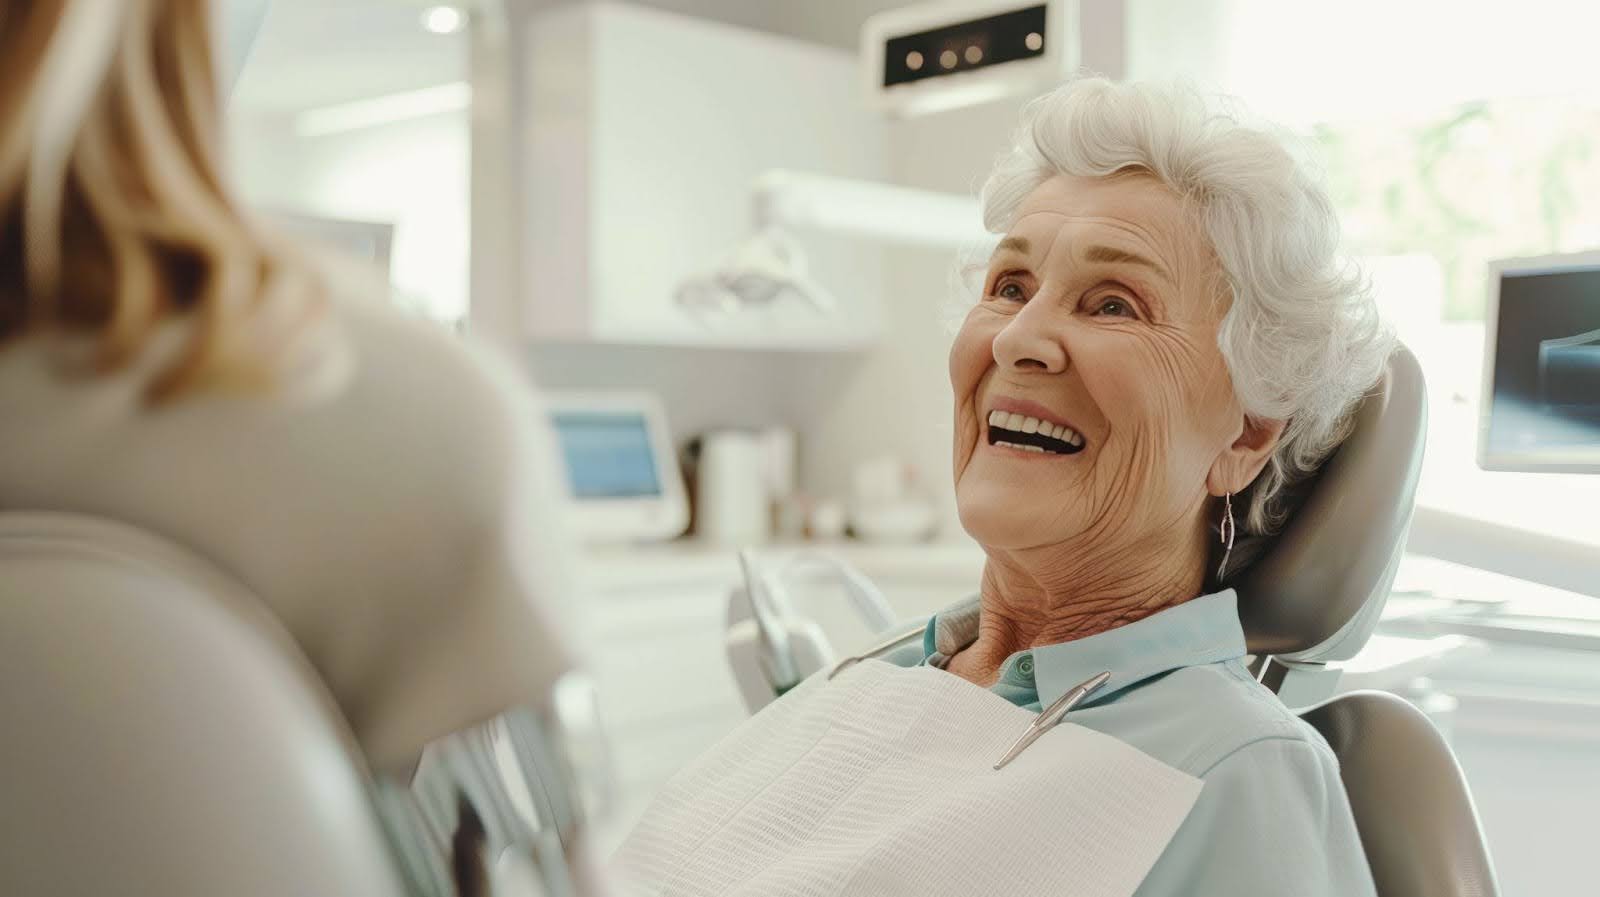 Full-arch dental solutions like All-On-4 dental implants and Snap-On dentures are transformative options for individuals seeking to restore a complete smile